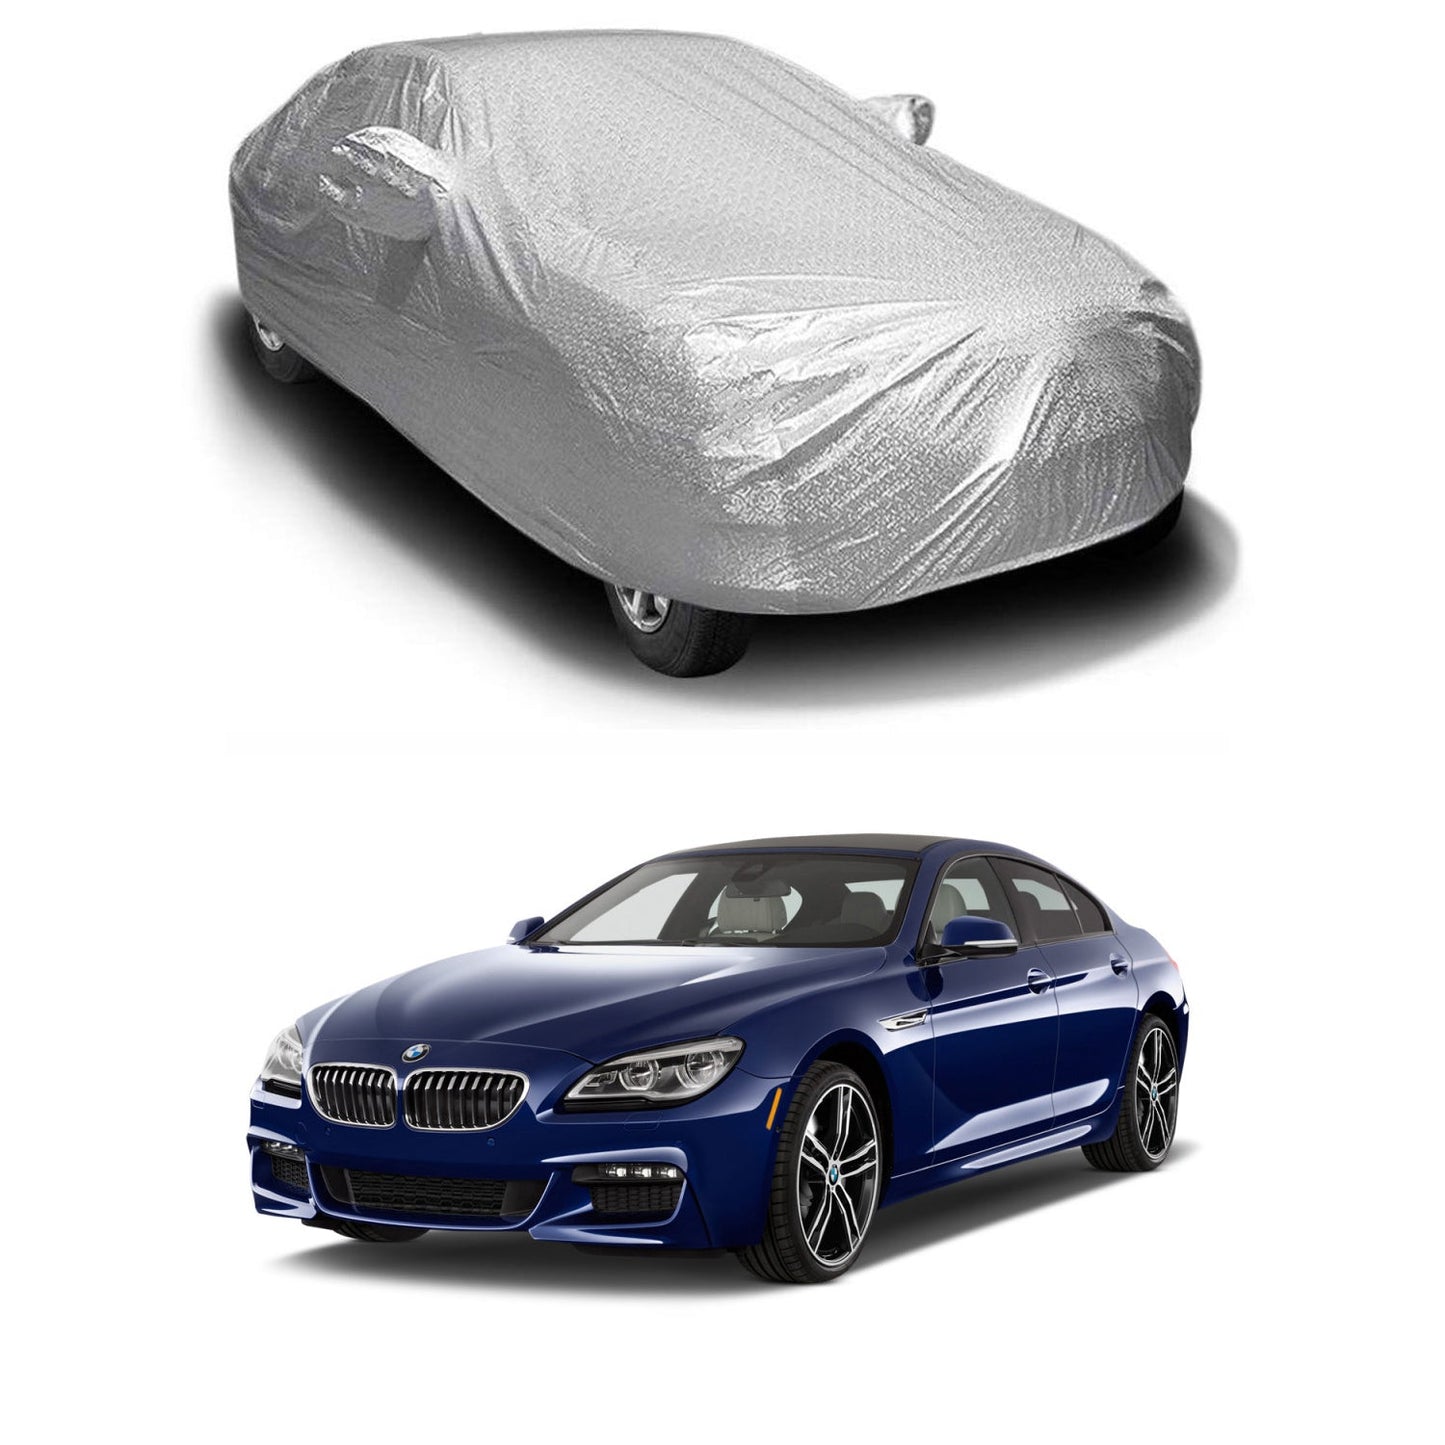 Oshotto Spyro Silver Anti Reflective, dustProof Silver and Water Proof Silver Car Body Cover with Mirror Pockets For BMW 6 Series